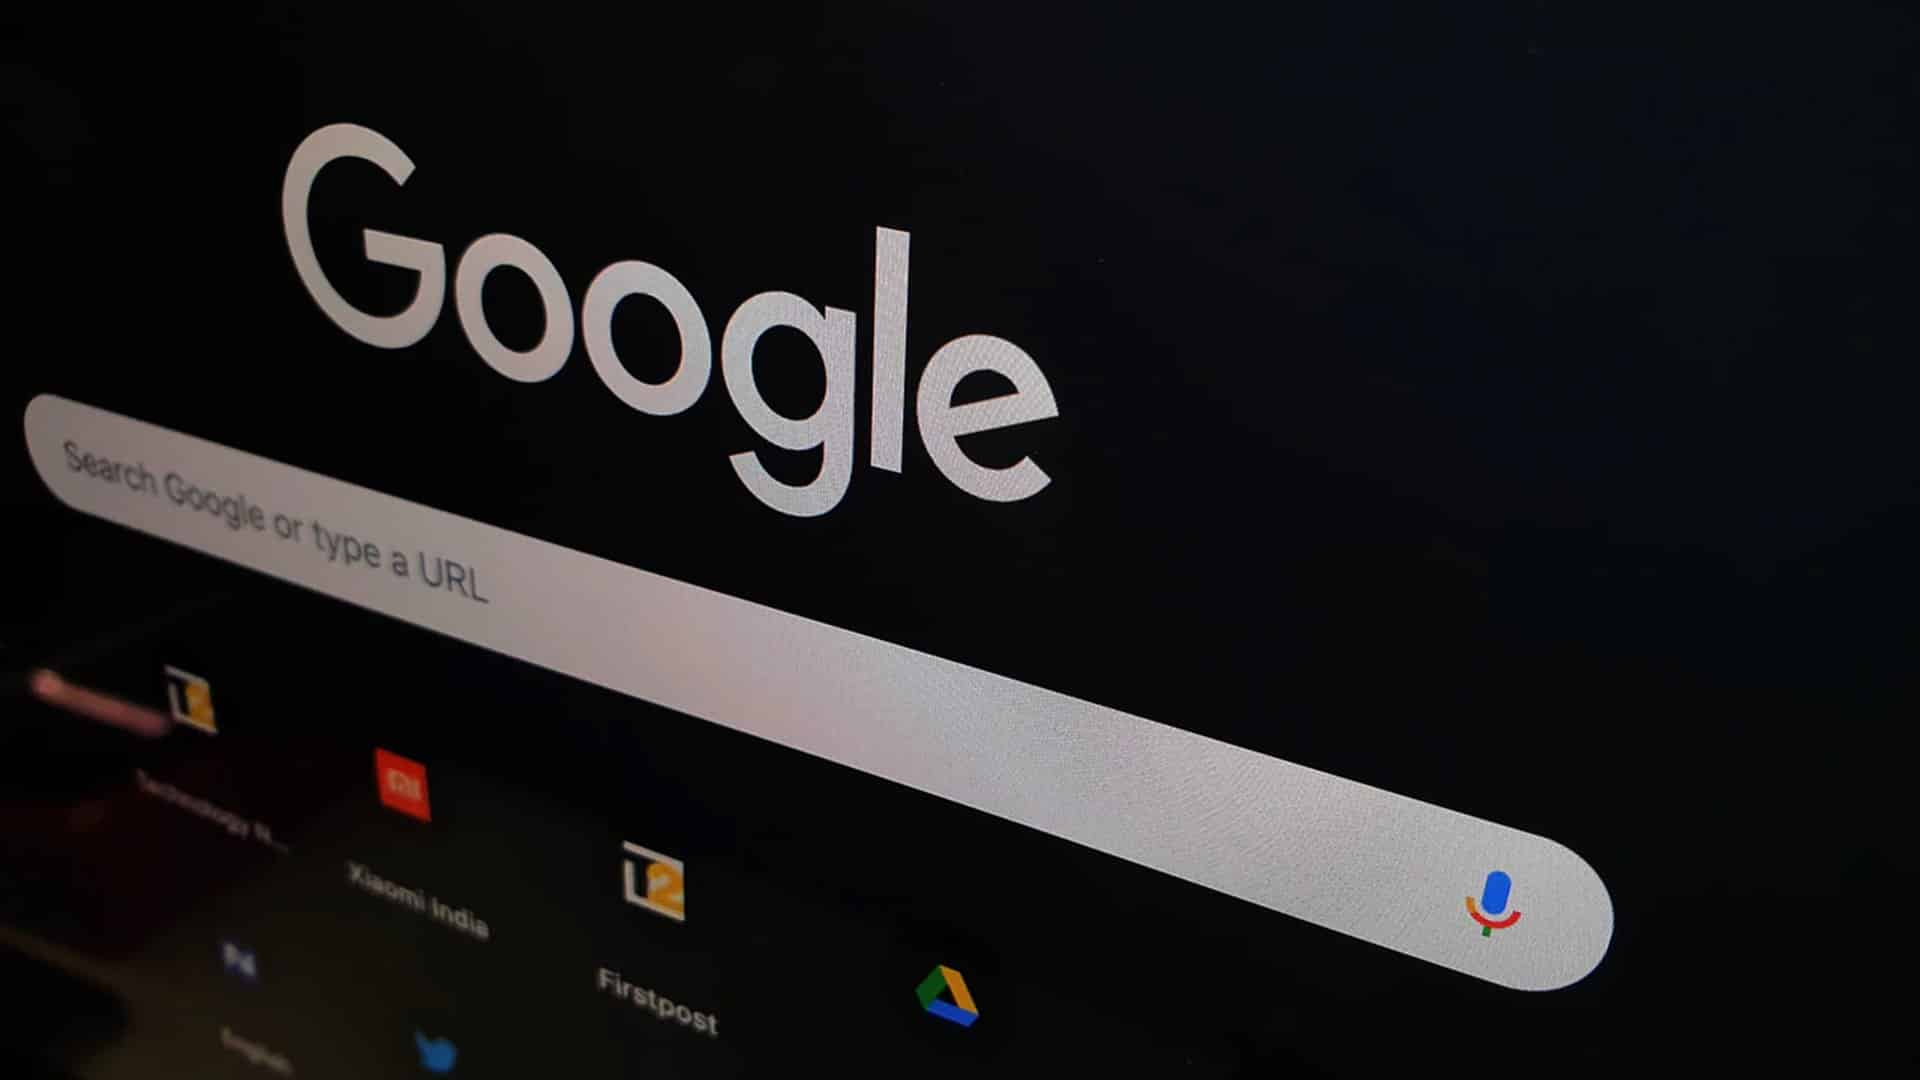 Google Search rolls out dark theme for desktop users. How to enable